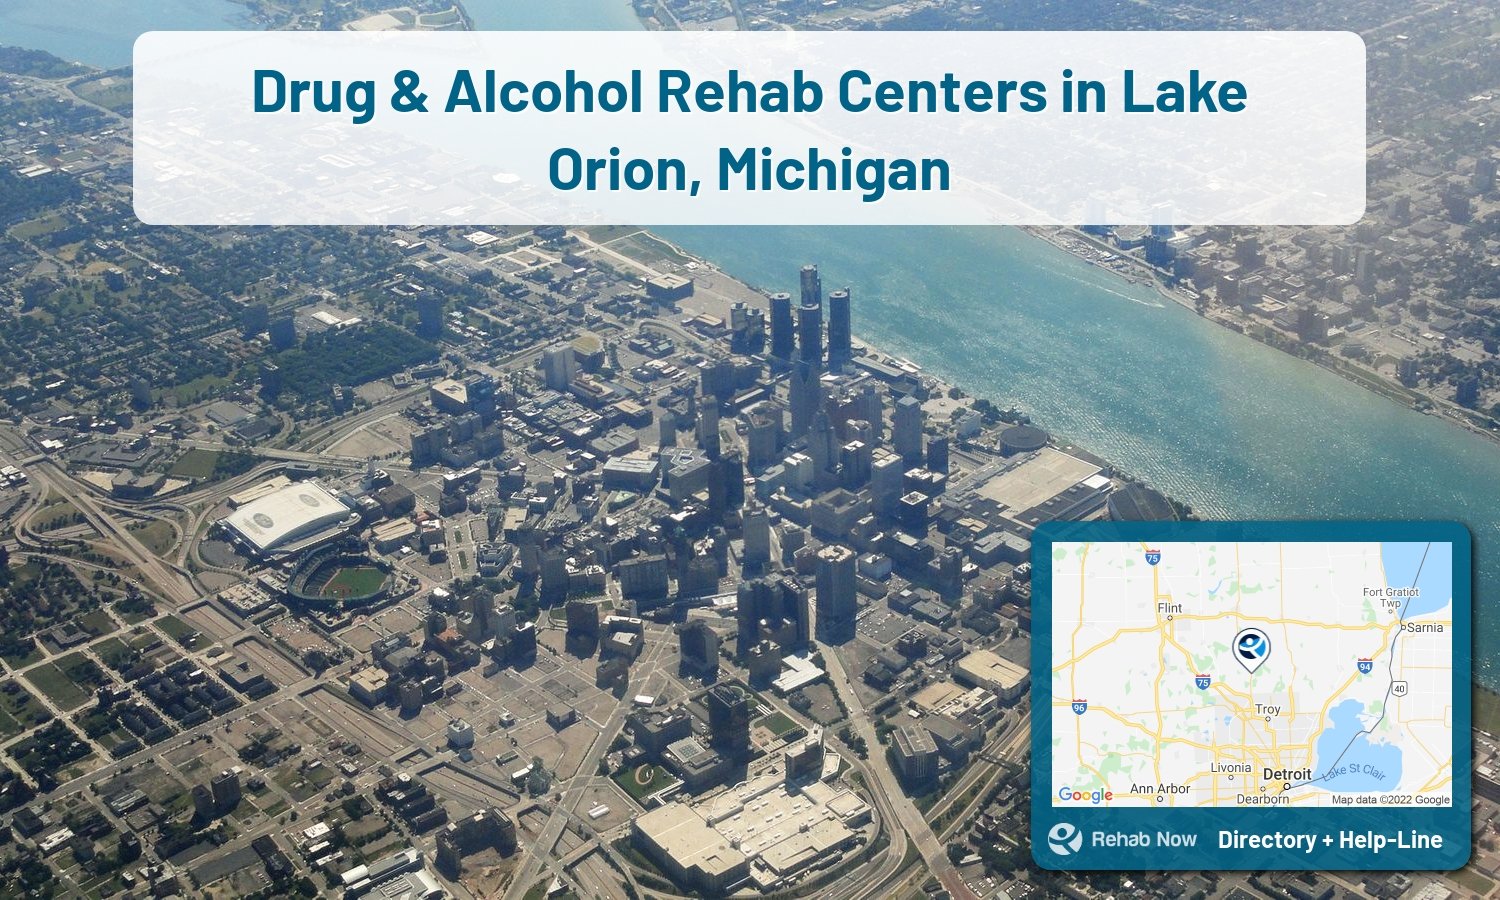 Lake Orion, MI Treatment Centers. Find drug rehab in Lake Orion, Michigan, or detox and treatment programs. Get the right help now!